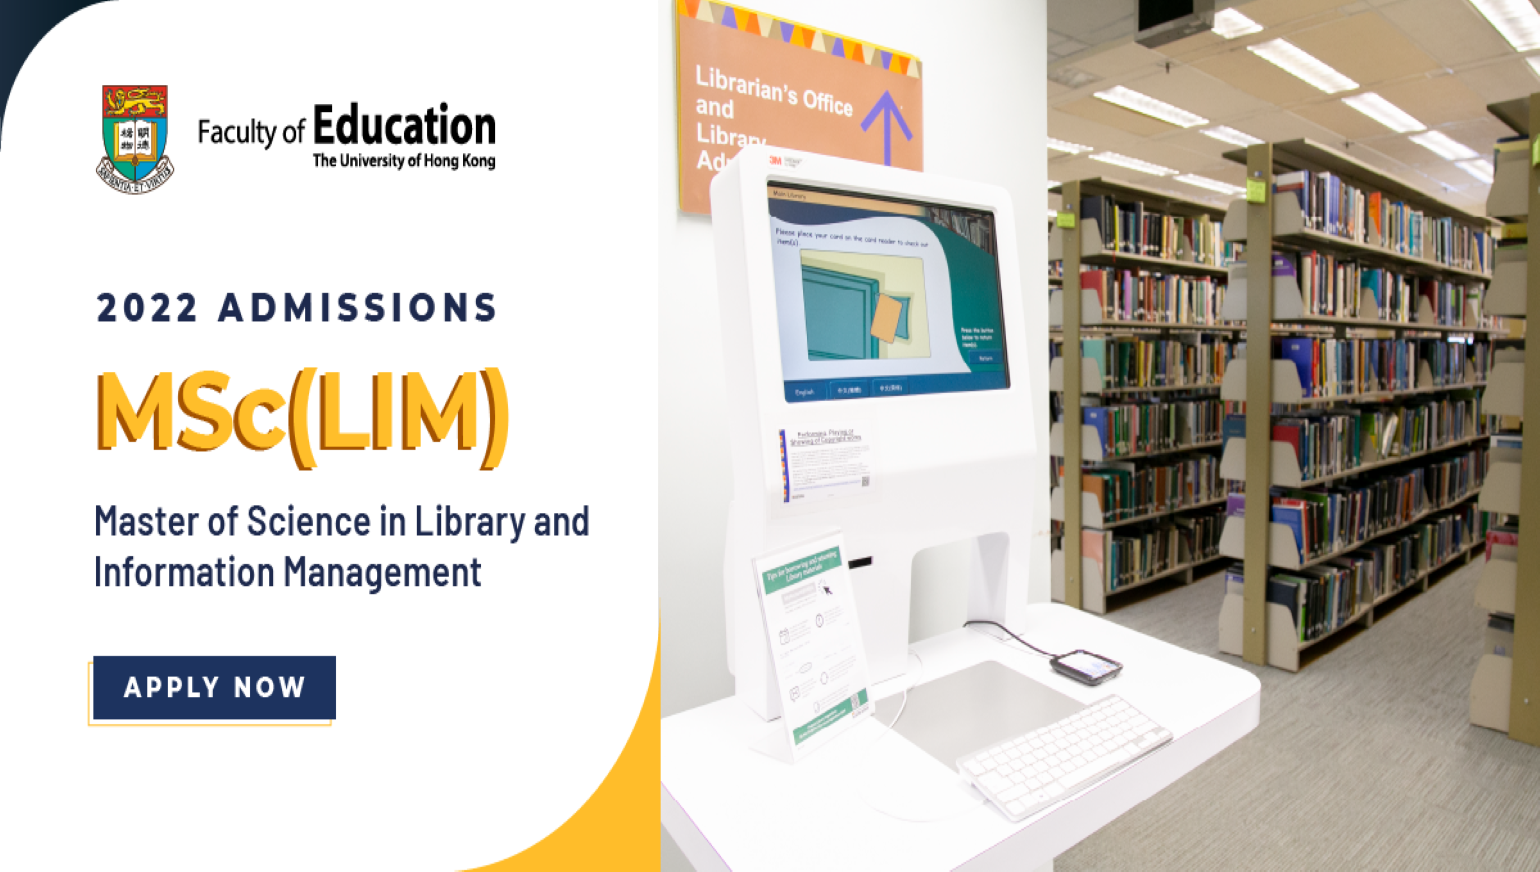 Master of Science in Library and Information Management [MSc(LIM)] - Information Session